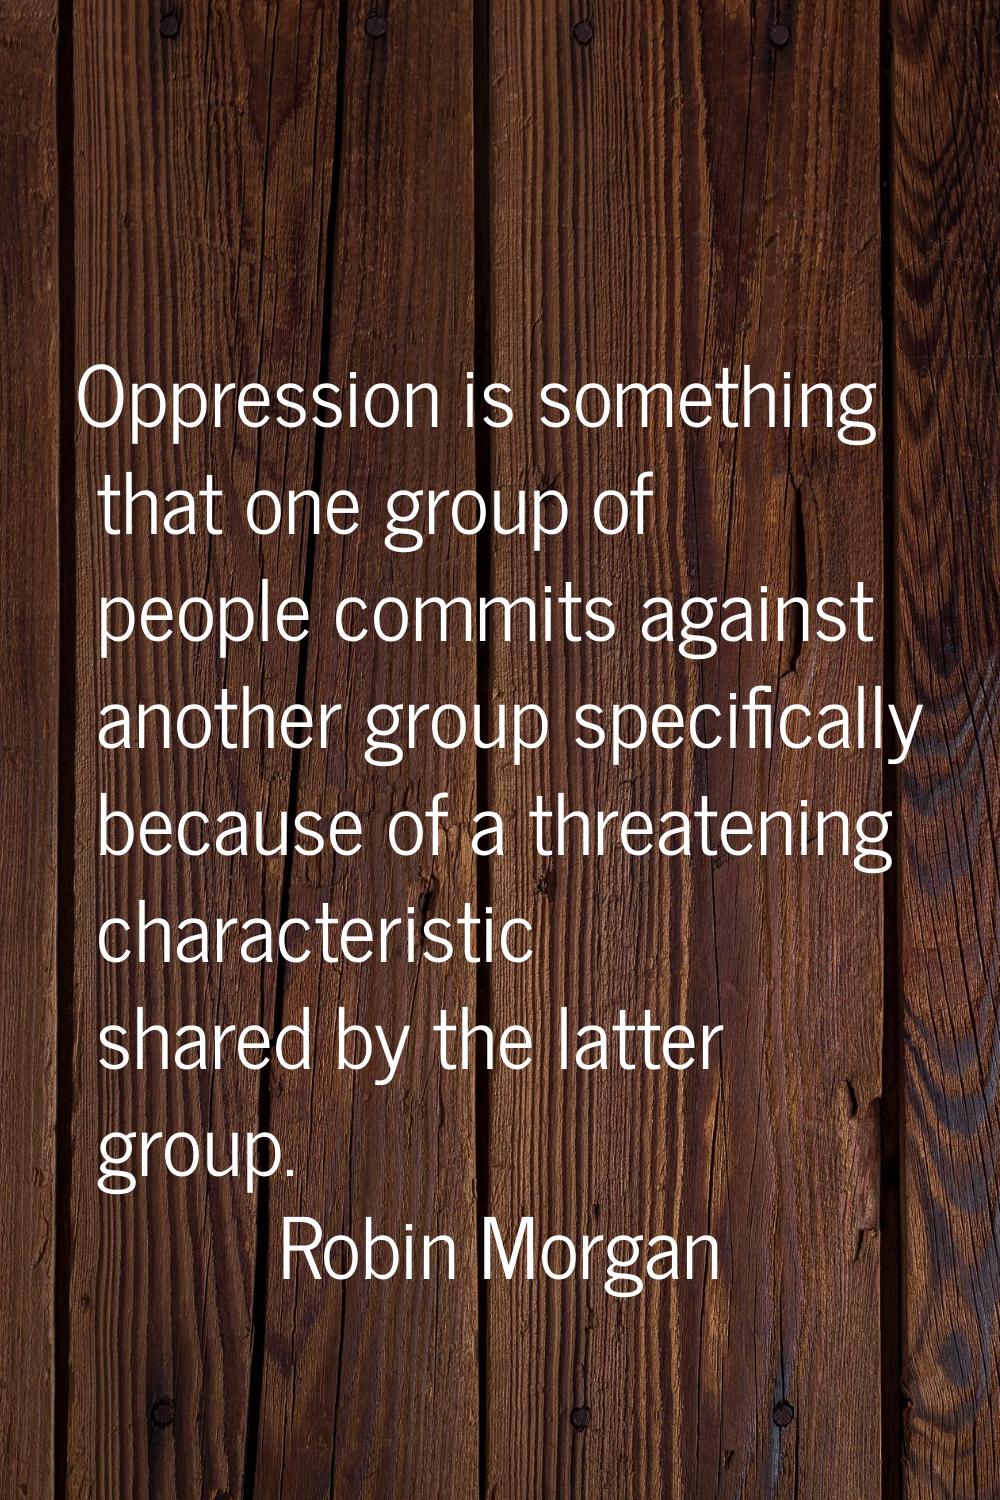 Oppression is something that one group of people commits against another group specifically because